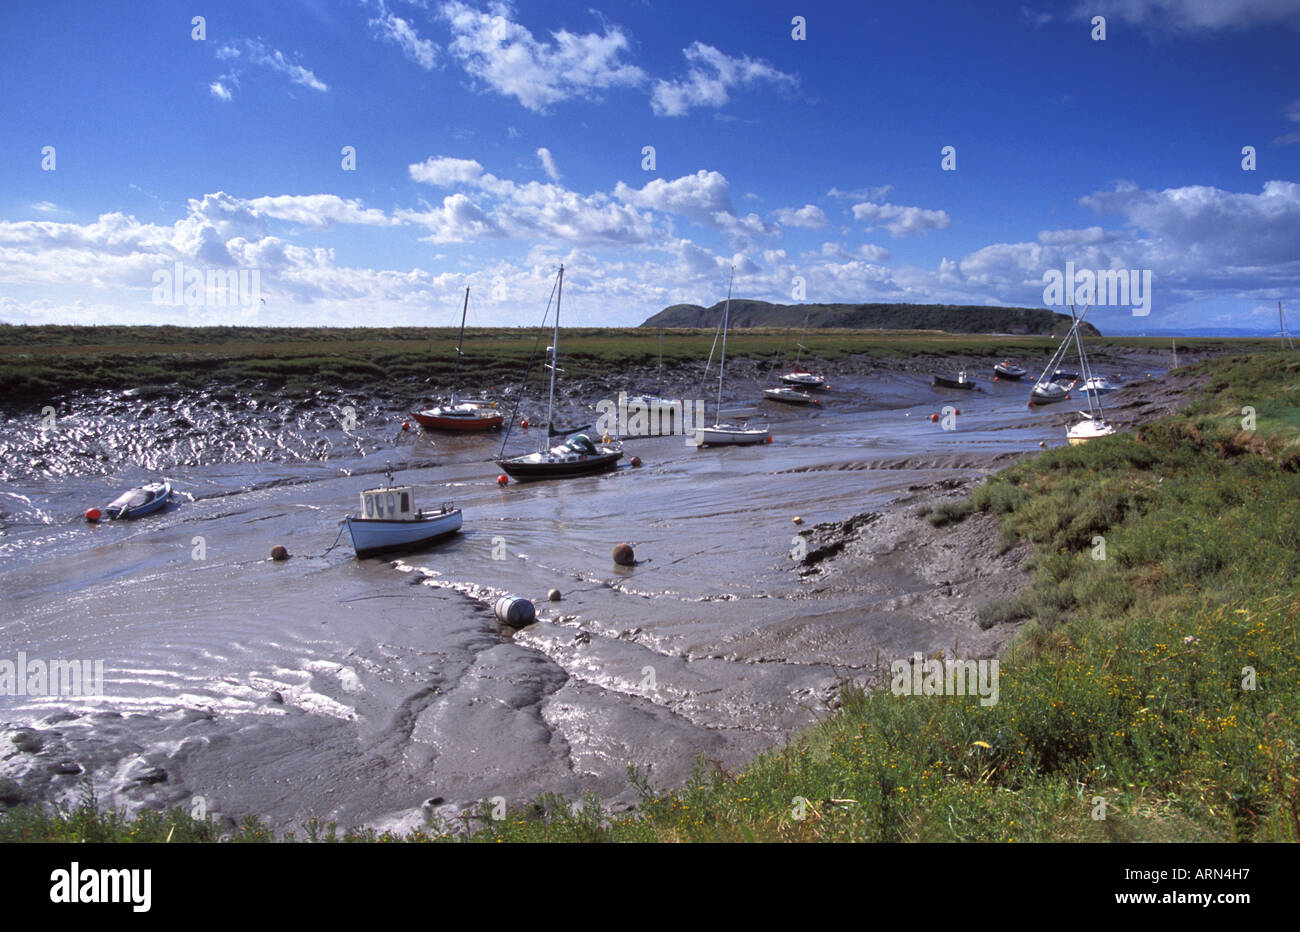 Boats in the Mouth of the river Axe Weston Bay Severn Estuary protected area North Somerset England Stock Photo